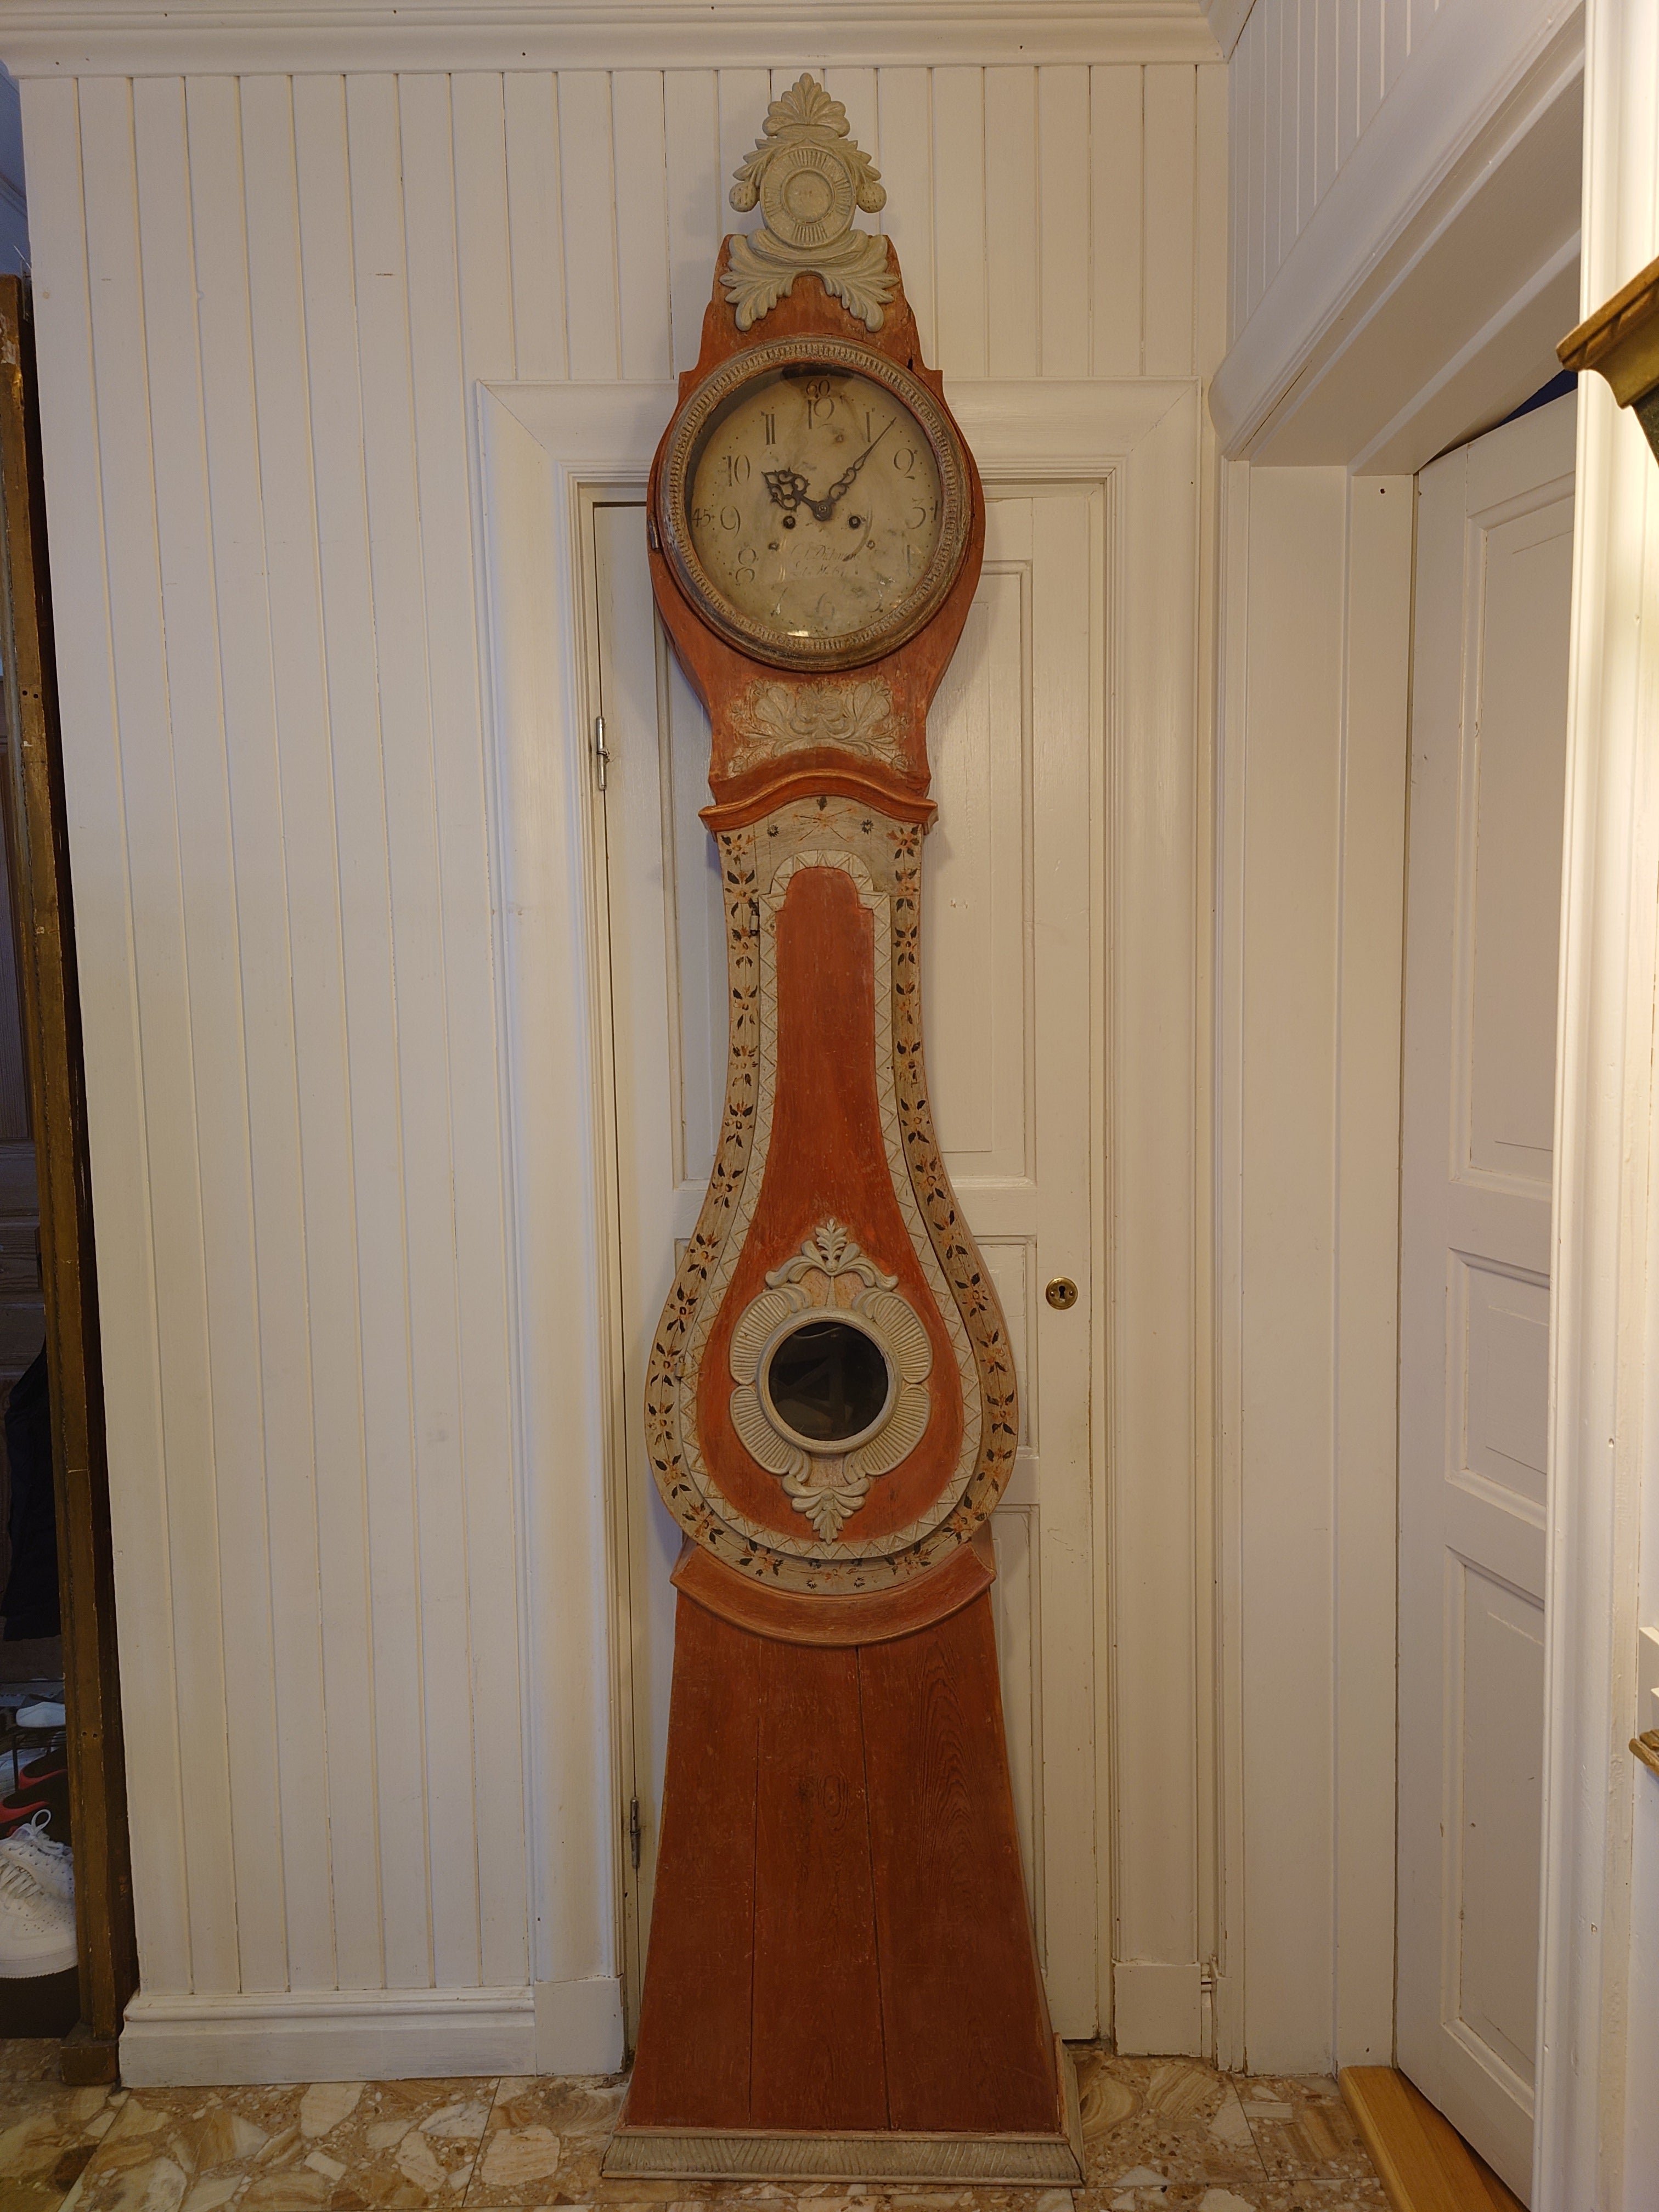 19th century Folk Art tall case clock from Luleå Norrbotten, Northern Sweden. Made in wood. Nice details and beautiful carvings. 
Beautiful handpainted flowers on the front. 
The Middle of the case has a windowed door to access the inside. 
This